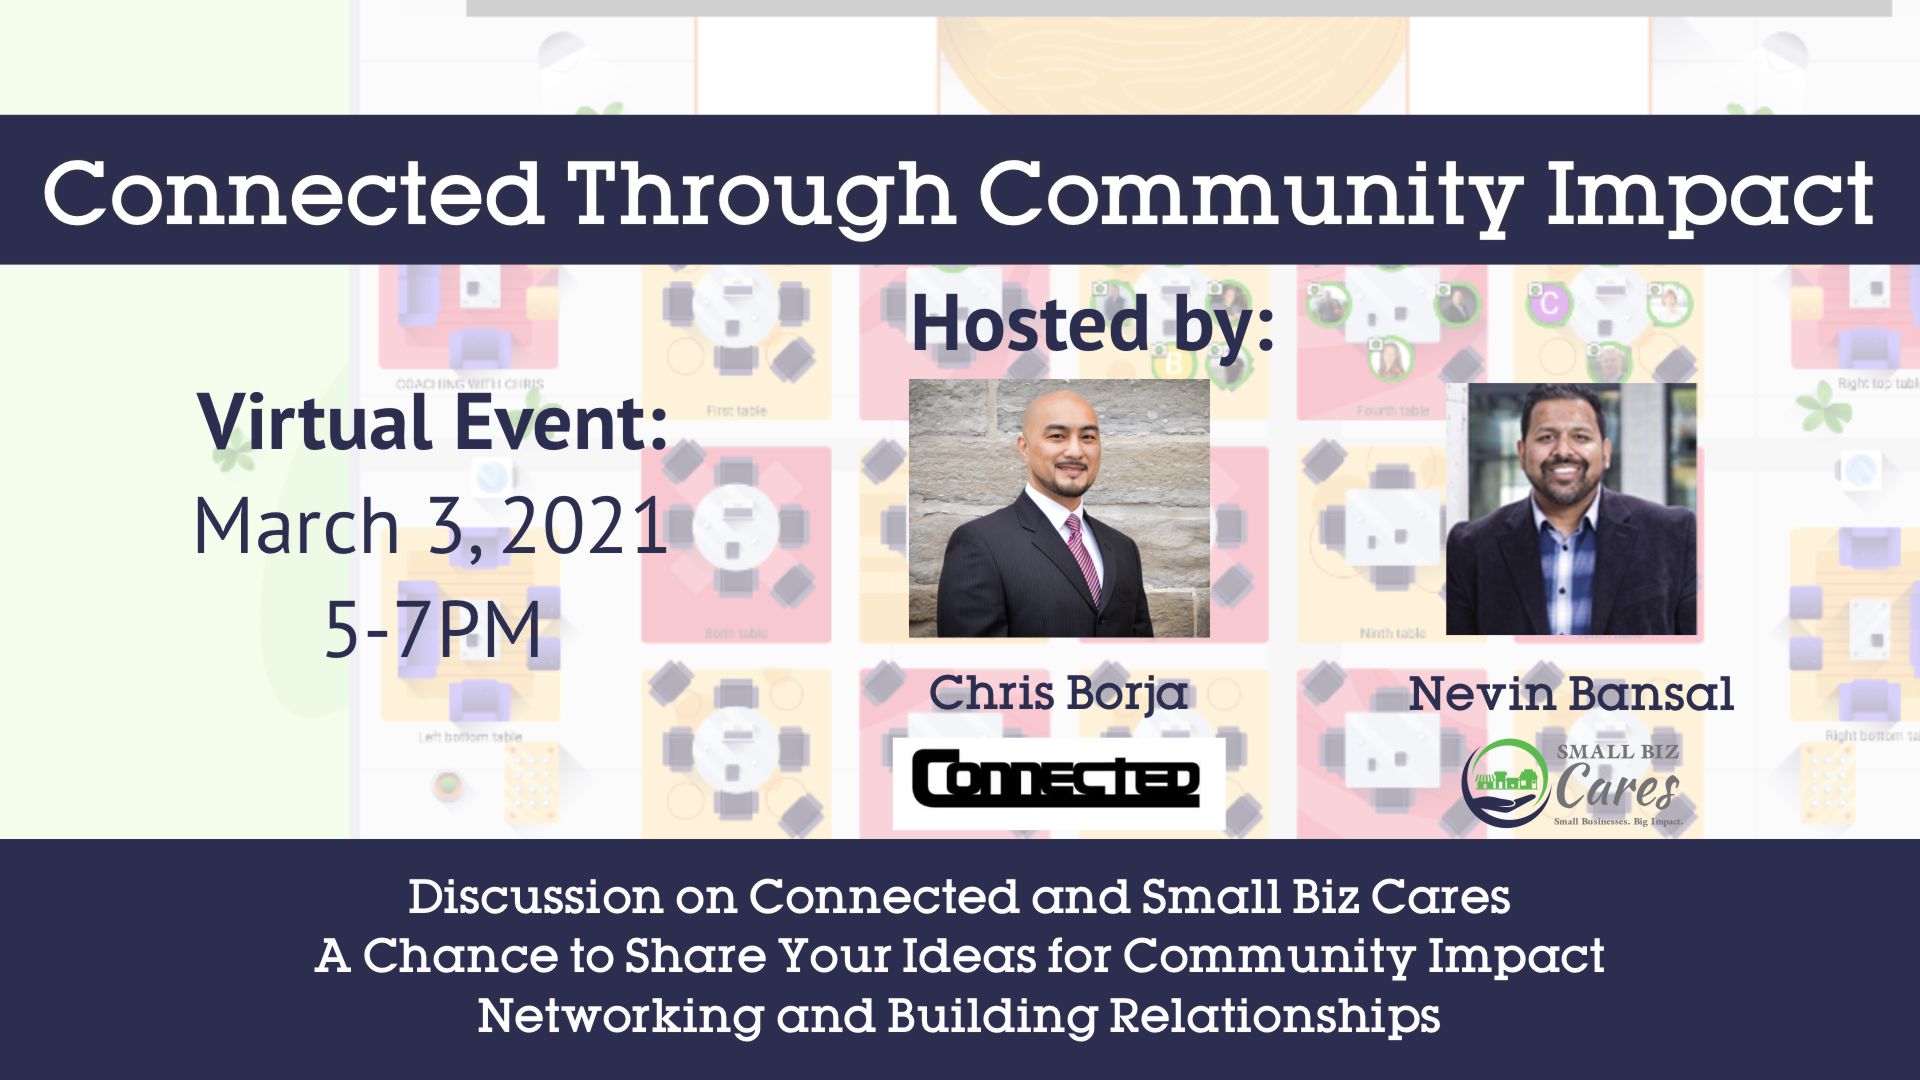 Virtual Event: Connected Through Community Impact